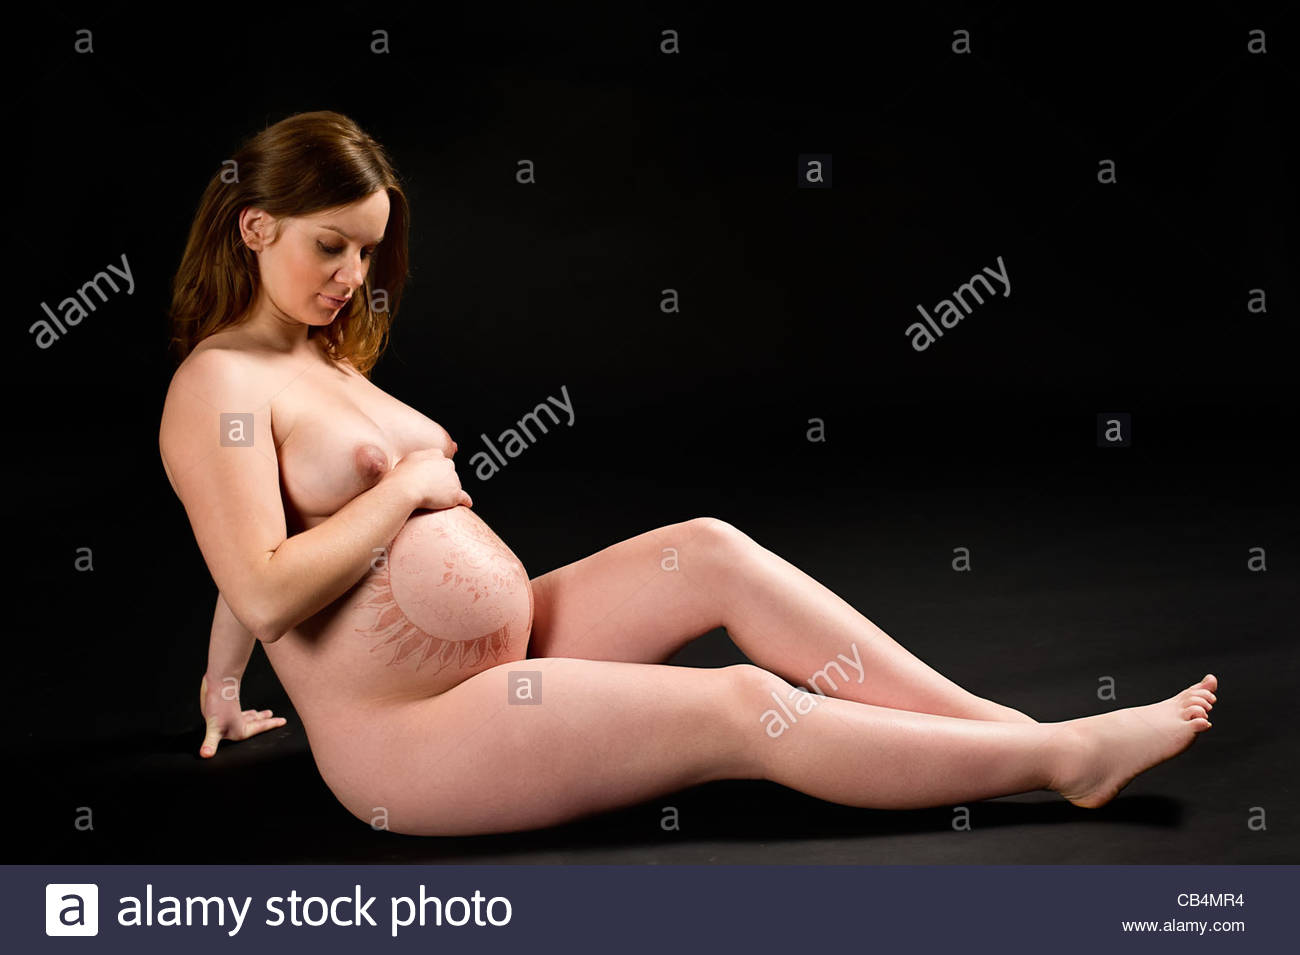 9 month pregnant wife nude - Black Pregnant Nudes 104